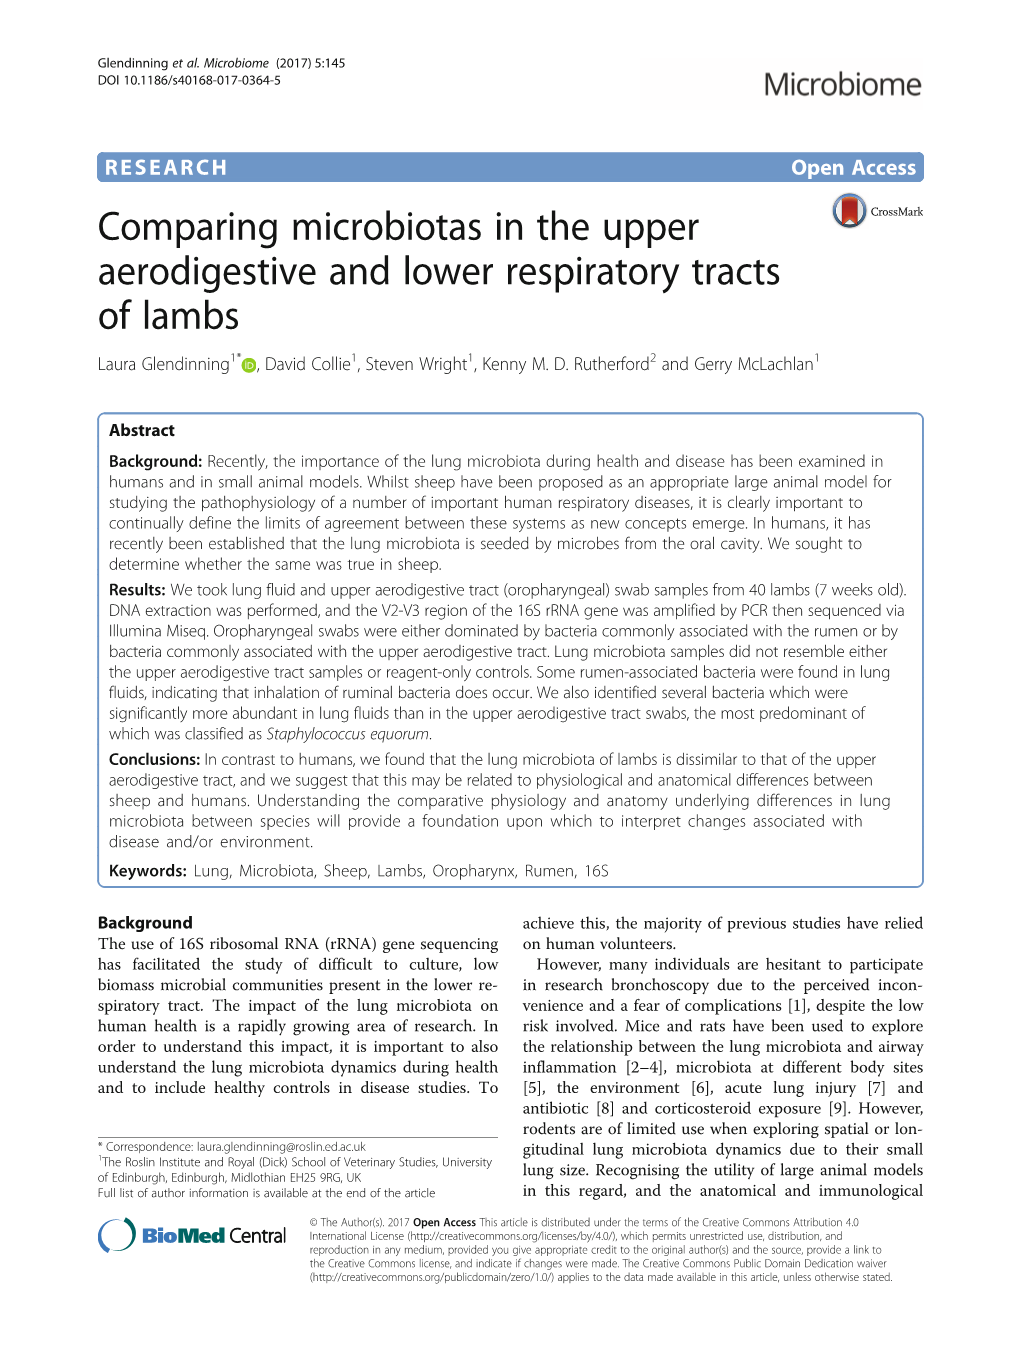 Comparing Microbiotas in the Upper Aerodigestive and Lower Respiratory Tracts of Lambs Laura Glendinning1* , David Collie1, Steven Wright1, Kenny M